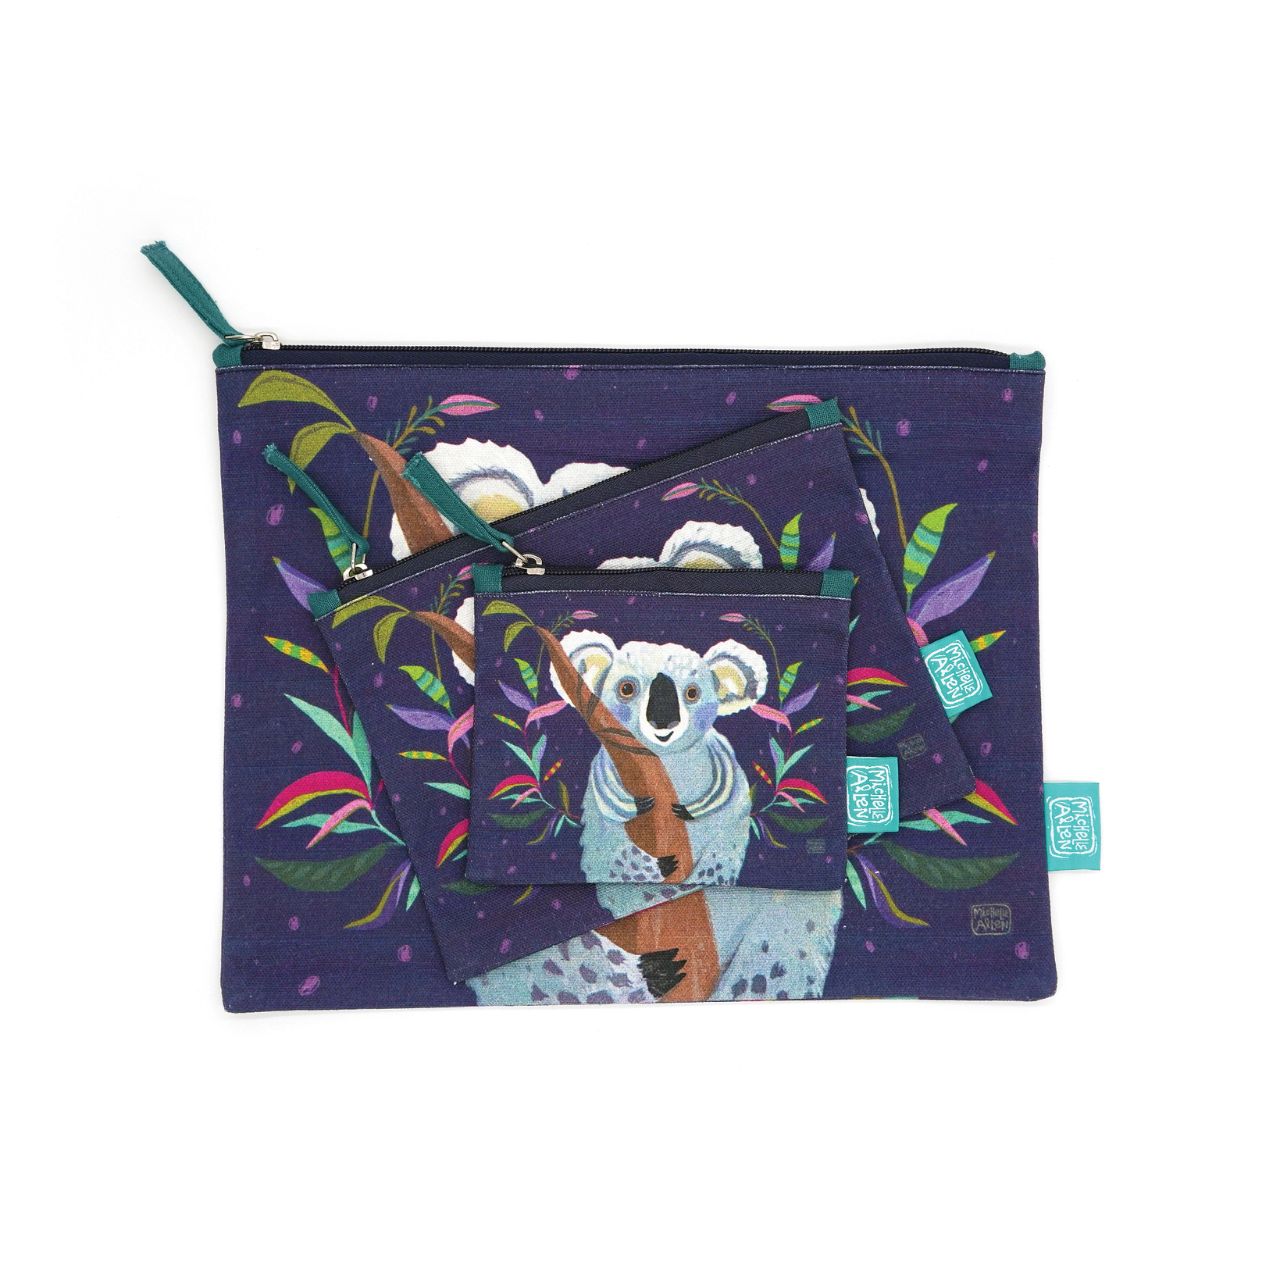 Michelle Allen Koala Zipped Pouch Large  These beautiful zippered 100% Cotton pouches are perfect for pencils/pens, trinkets, charging cords, make up or pretty much anything you can possibly think of. Exclusively designed by Michelle Allen.